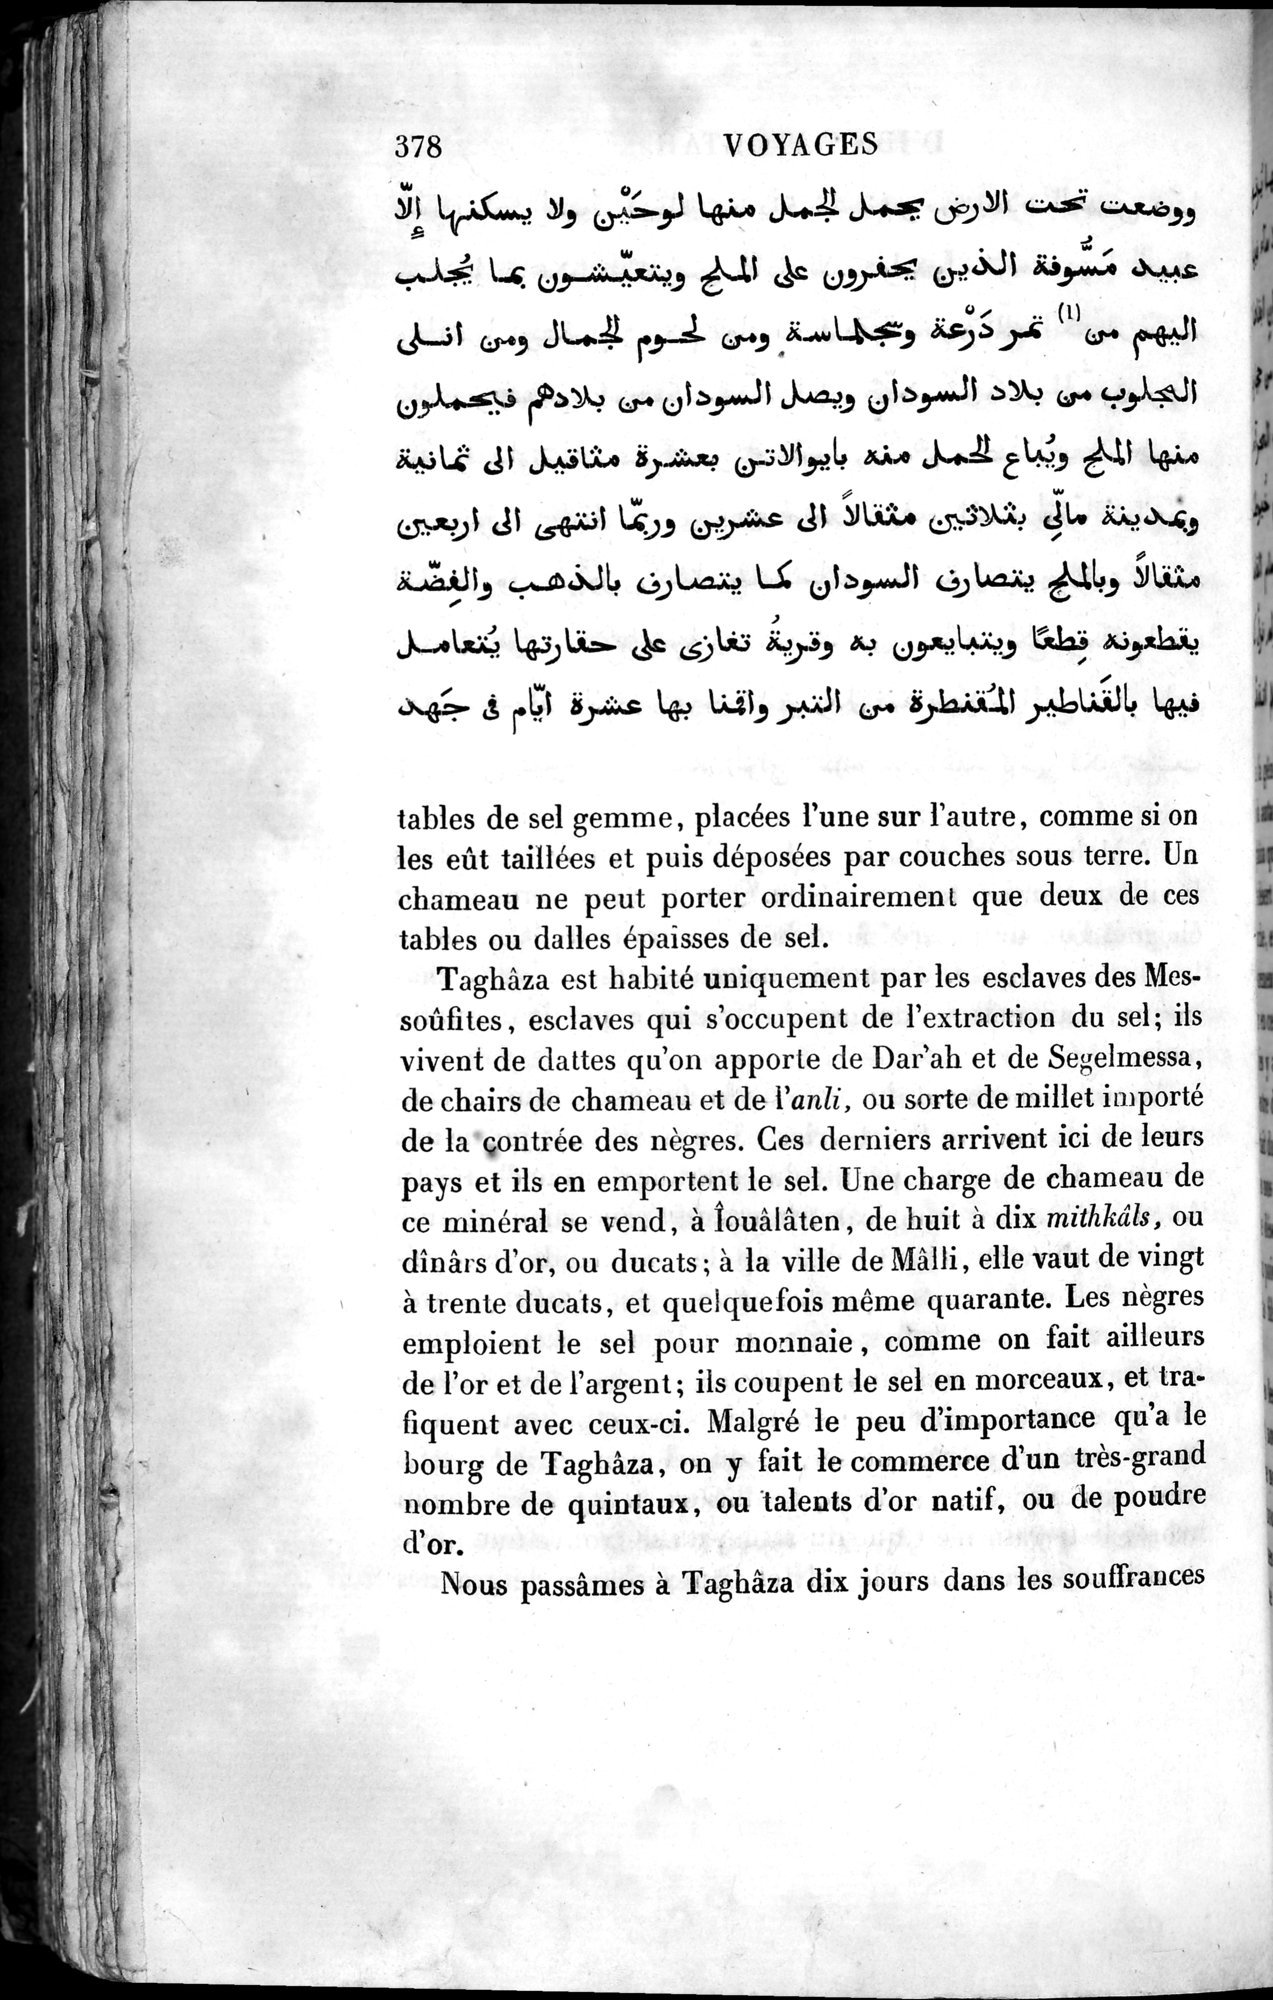 Voyages d'Ibn Batoutah : vol.4 / Page 390 (Grayscale High Resolution Image)